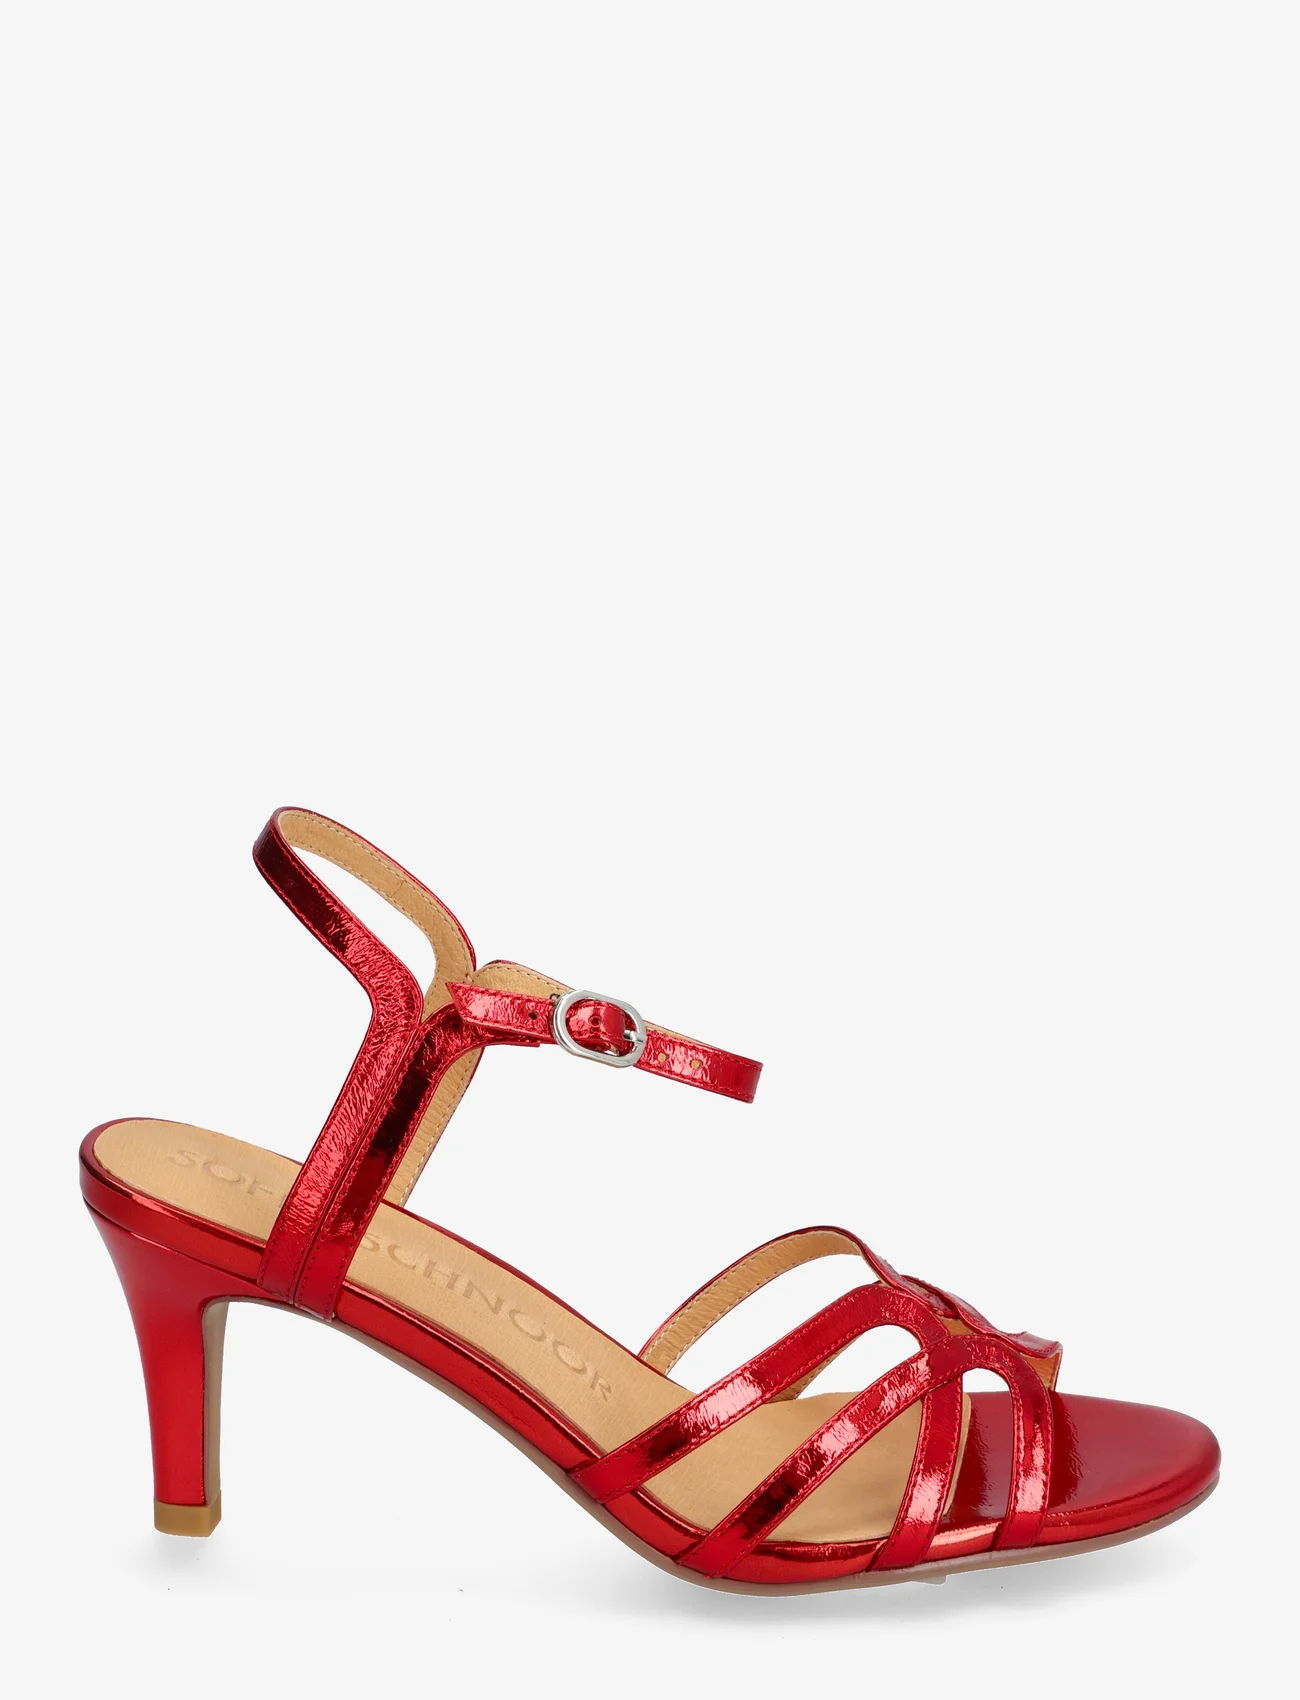 Sofie Schnoor - Stiletto - party wear at outlet prices - red - 1